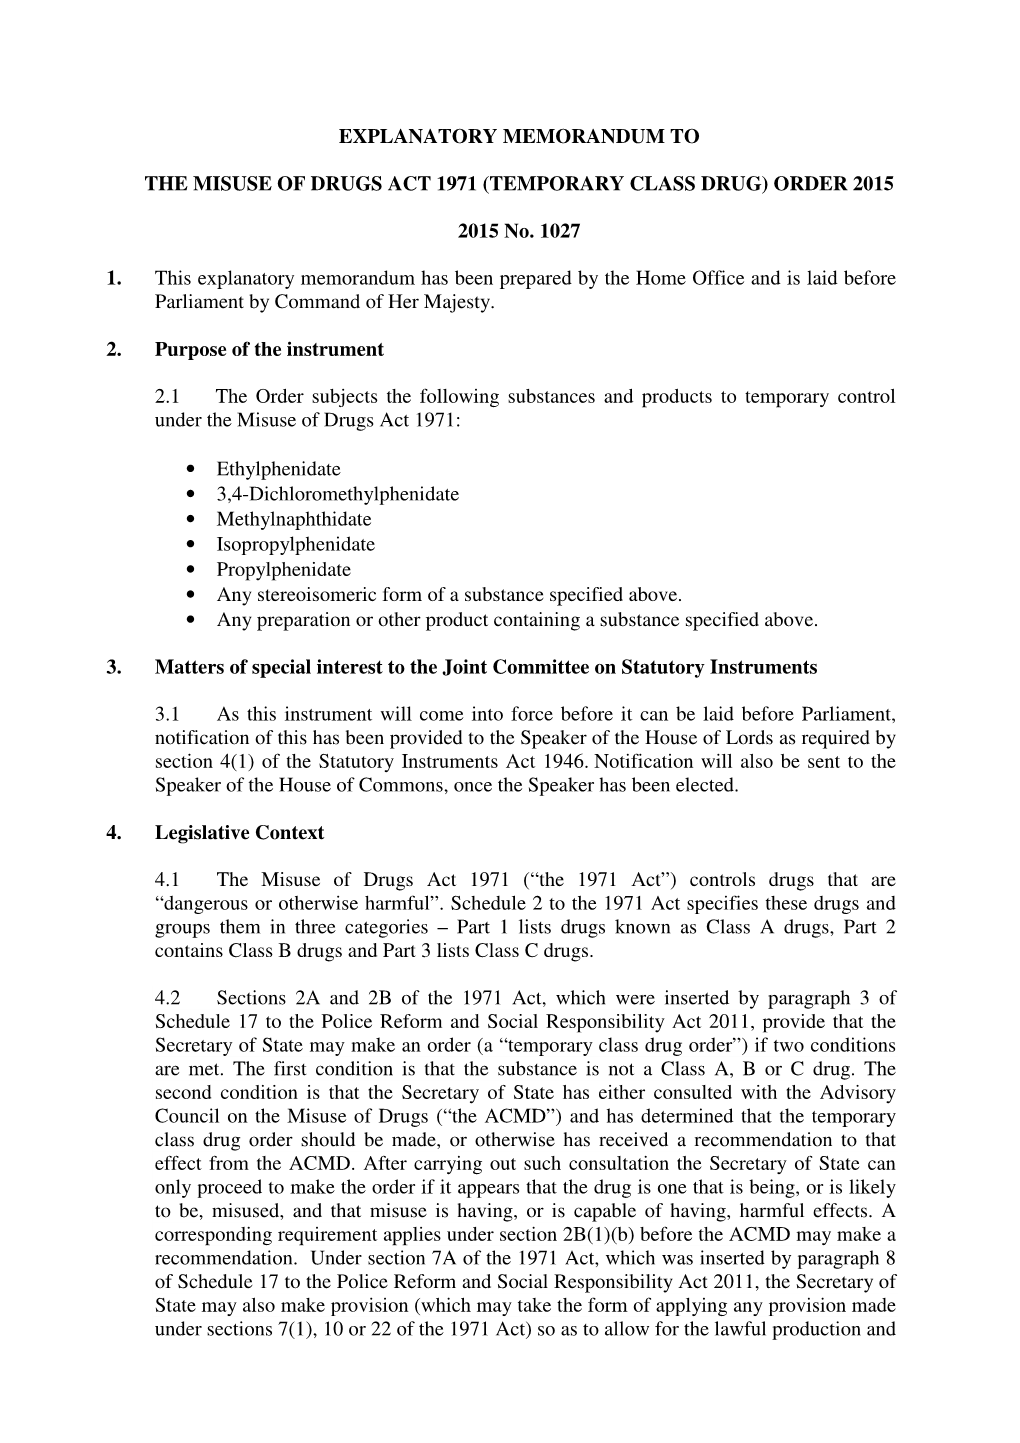 The Misuse of Drugs Act 1971 (Temporary Class Drug) Order 2015